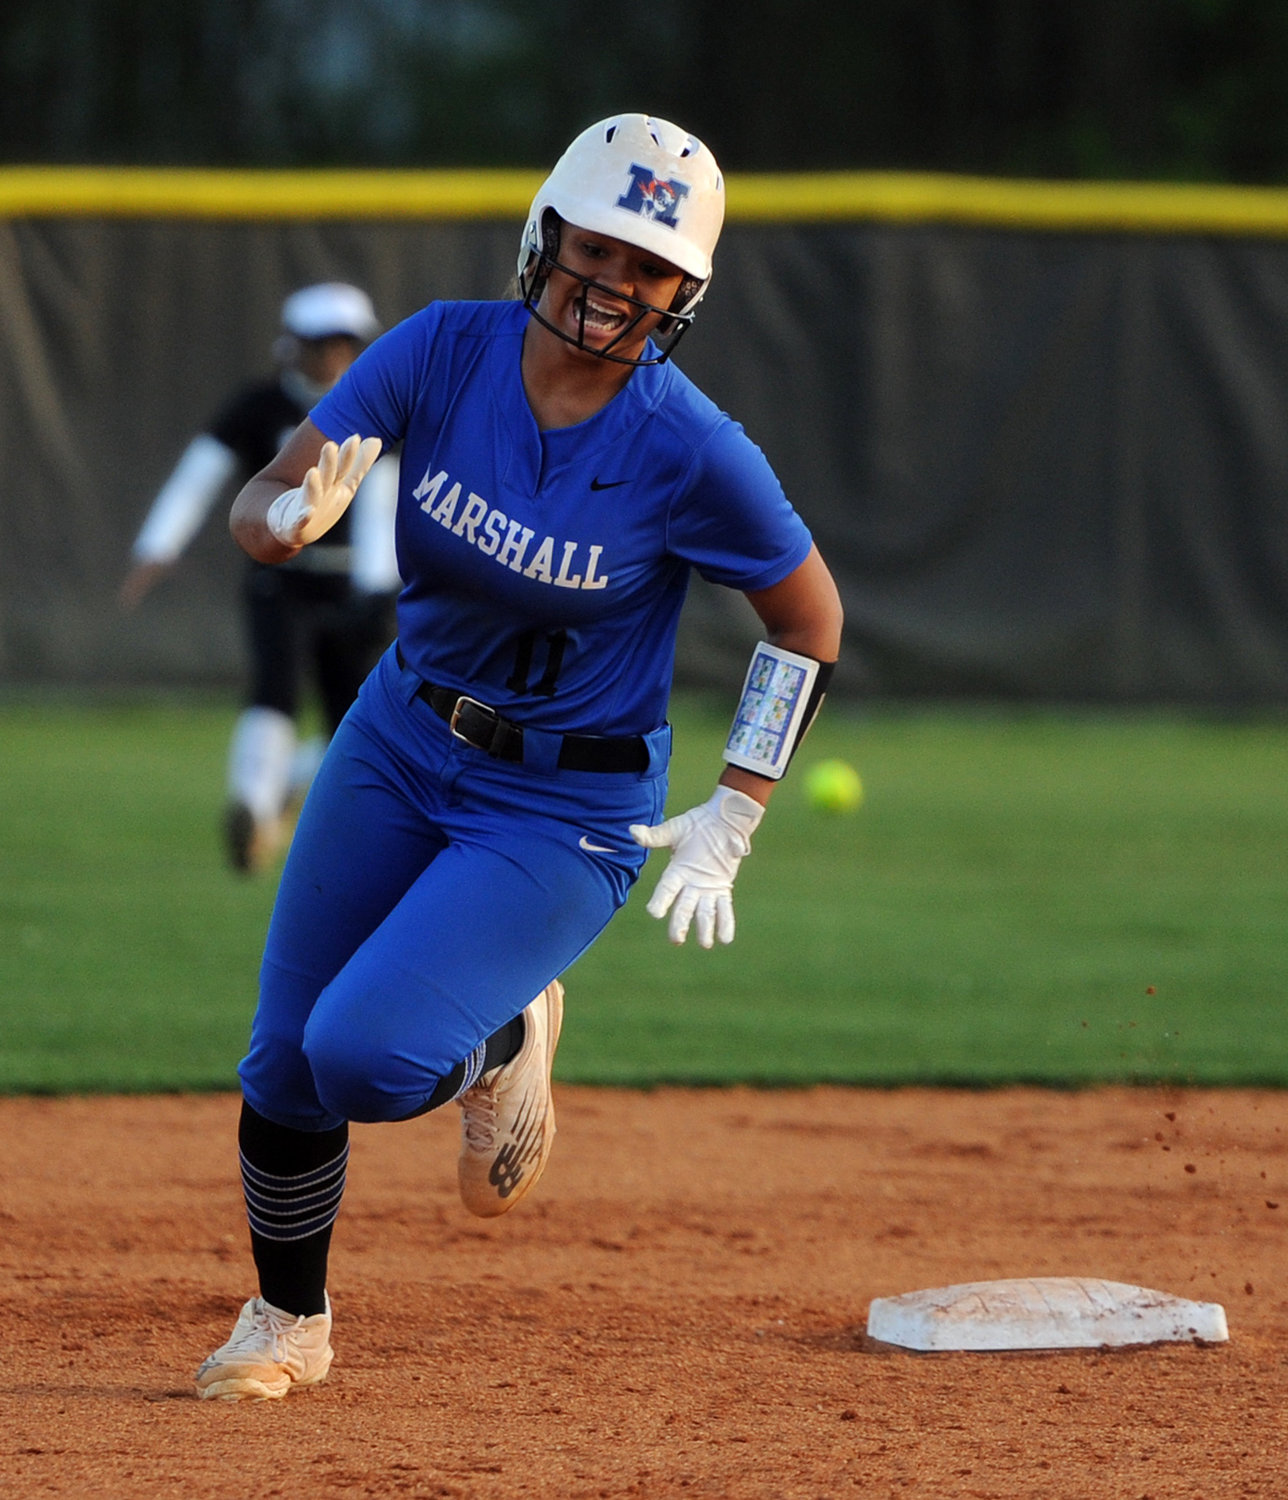 Demiyah Blackman rounds second and heads for third on a base hit.